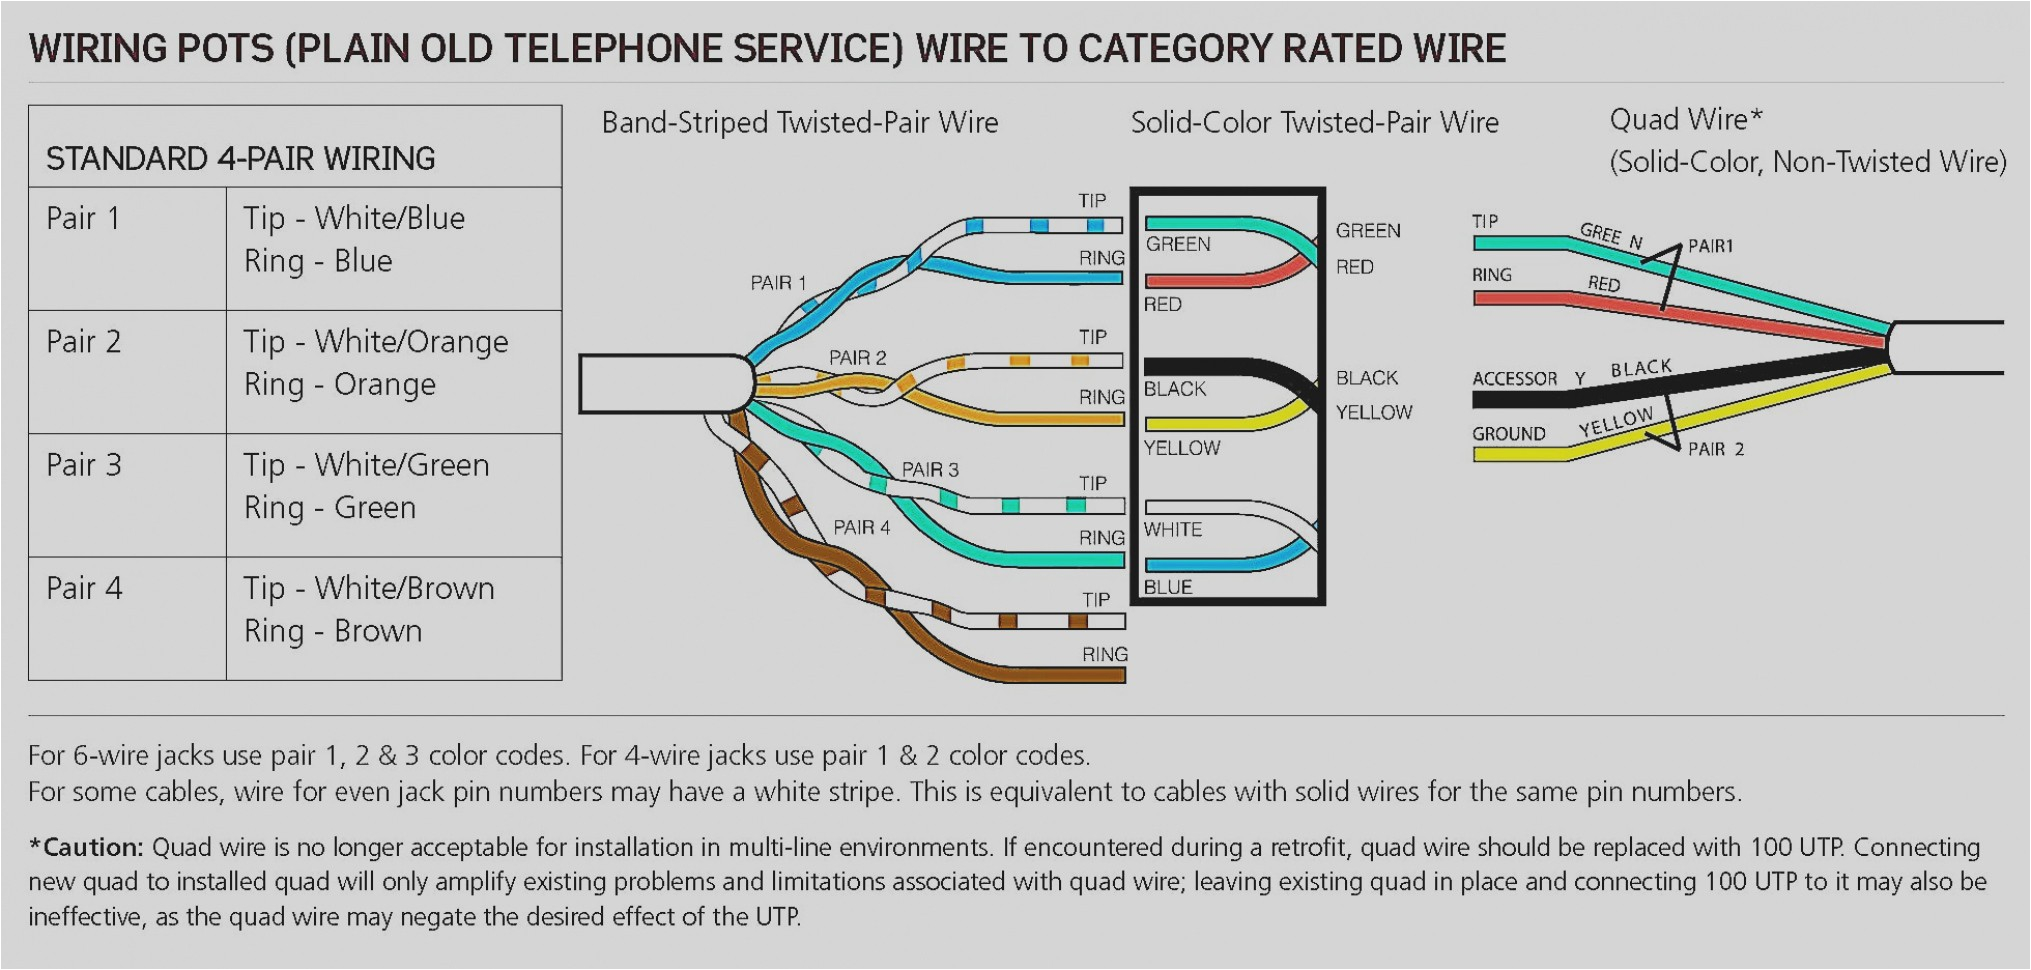 telephone wall jack wiring cat 5 wiring diagram img cat 5 wiring phone and internet cat